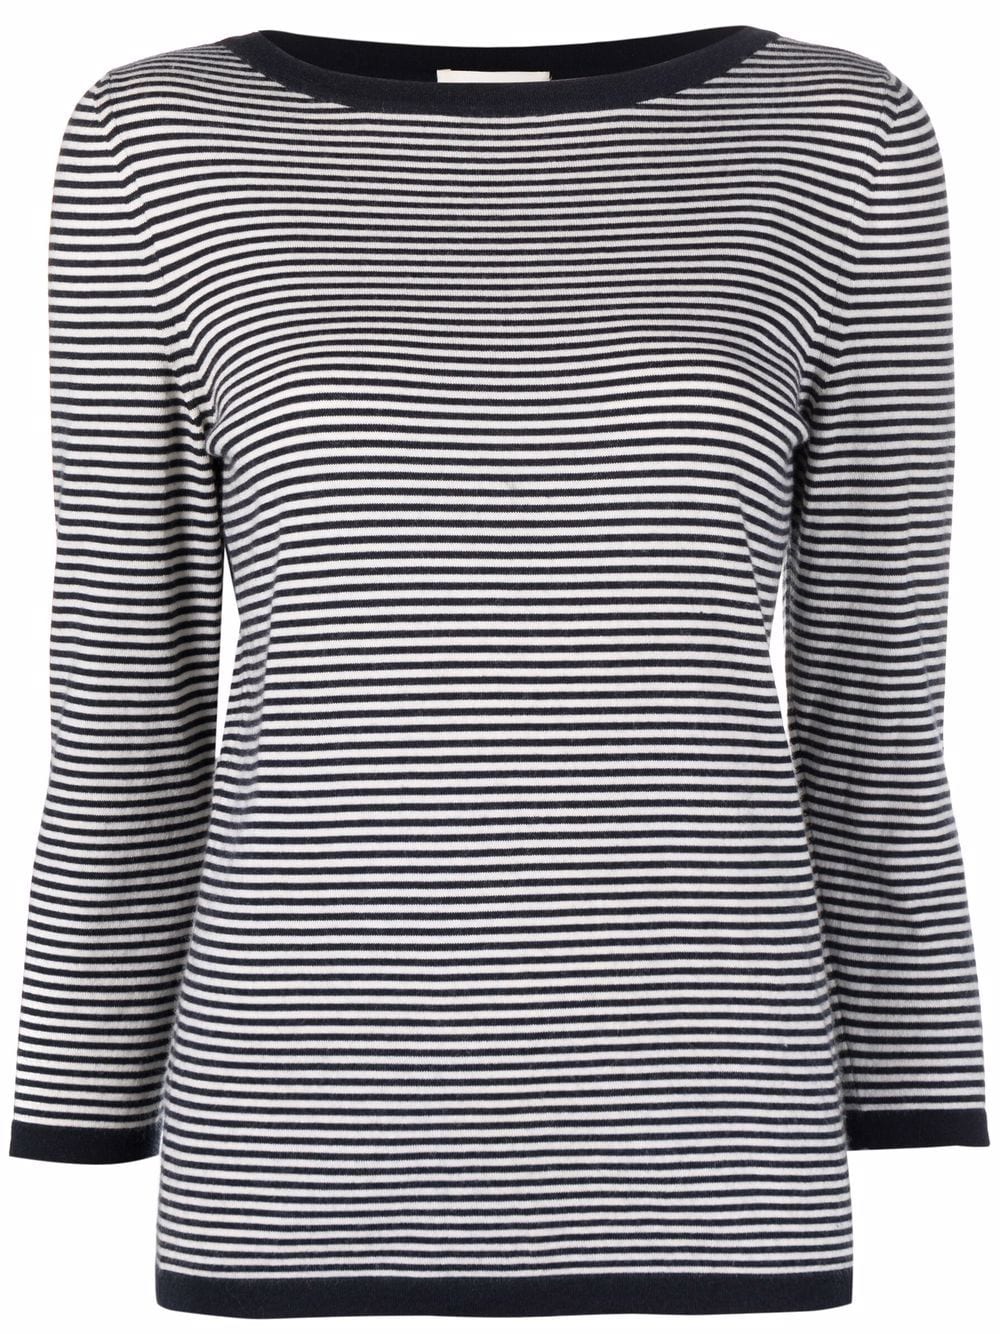 2000s pre-owned striped cashmere jumper